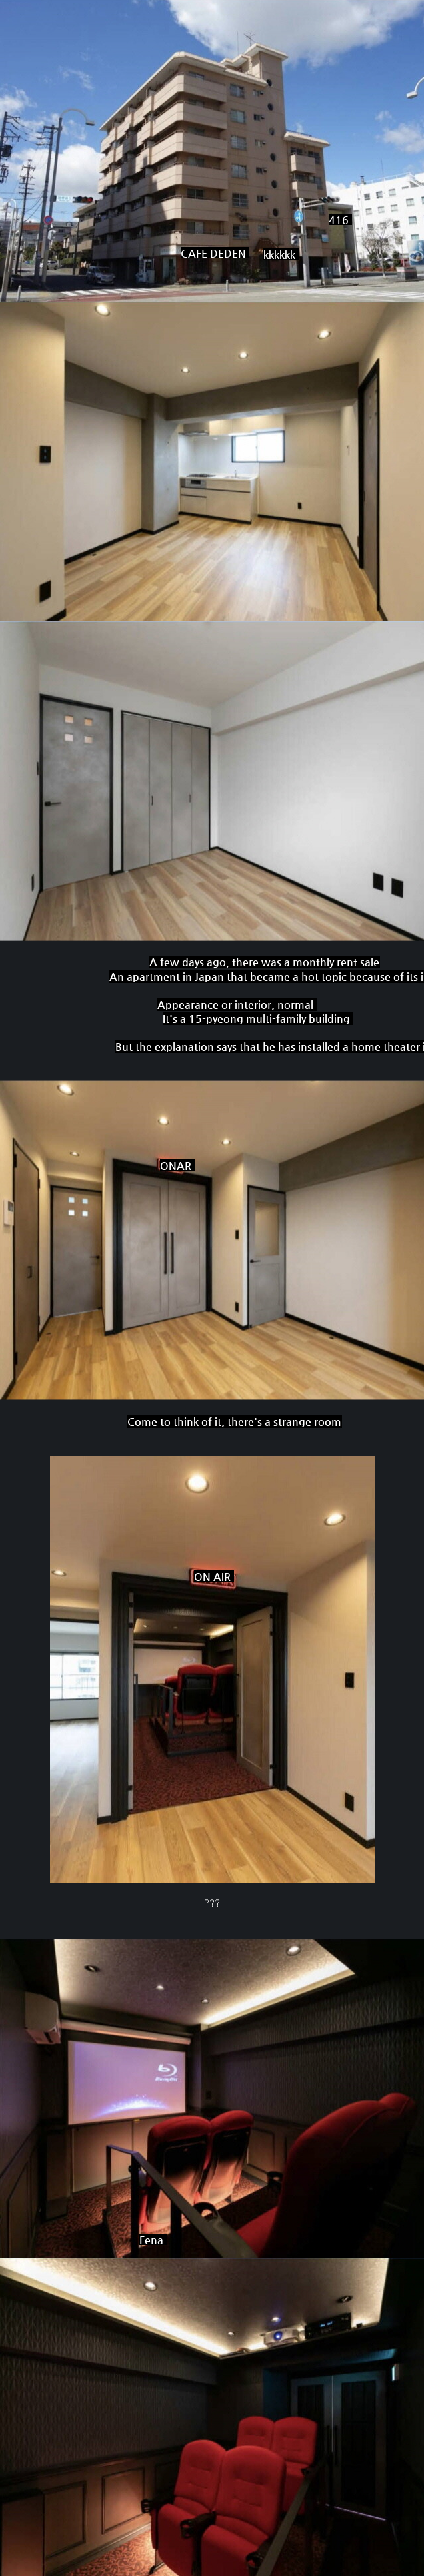 Japan's 900,000 won monthly rent apartment promoting the establishment of a home theater.jpg